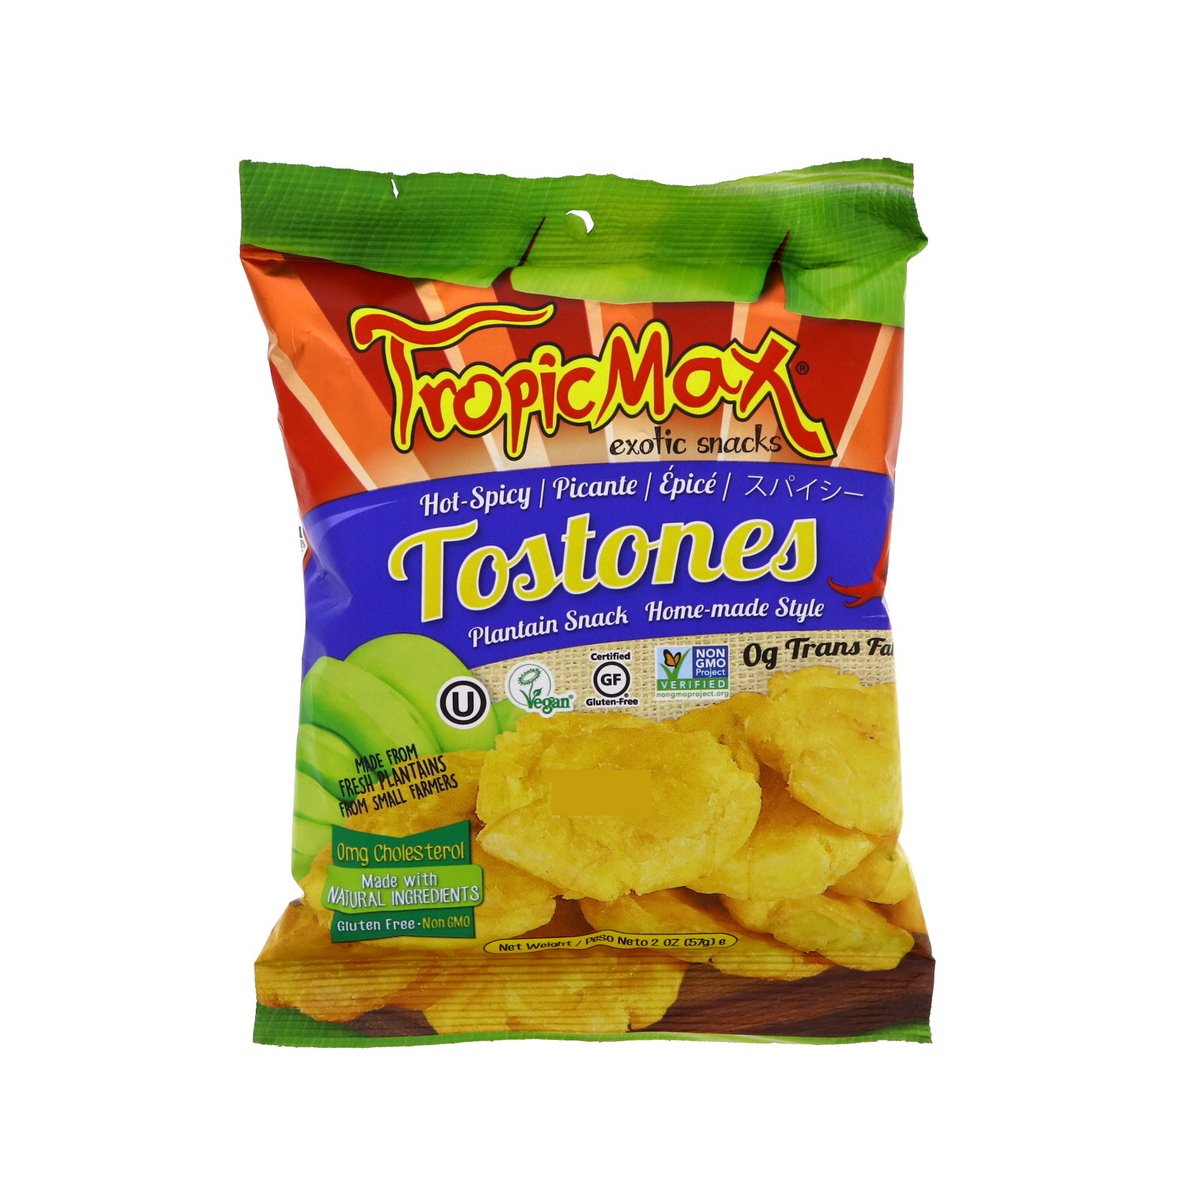 Tropic Max Gluten Free Hot & Spicy Tostones Plantain Snack 57 g